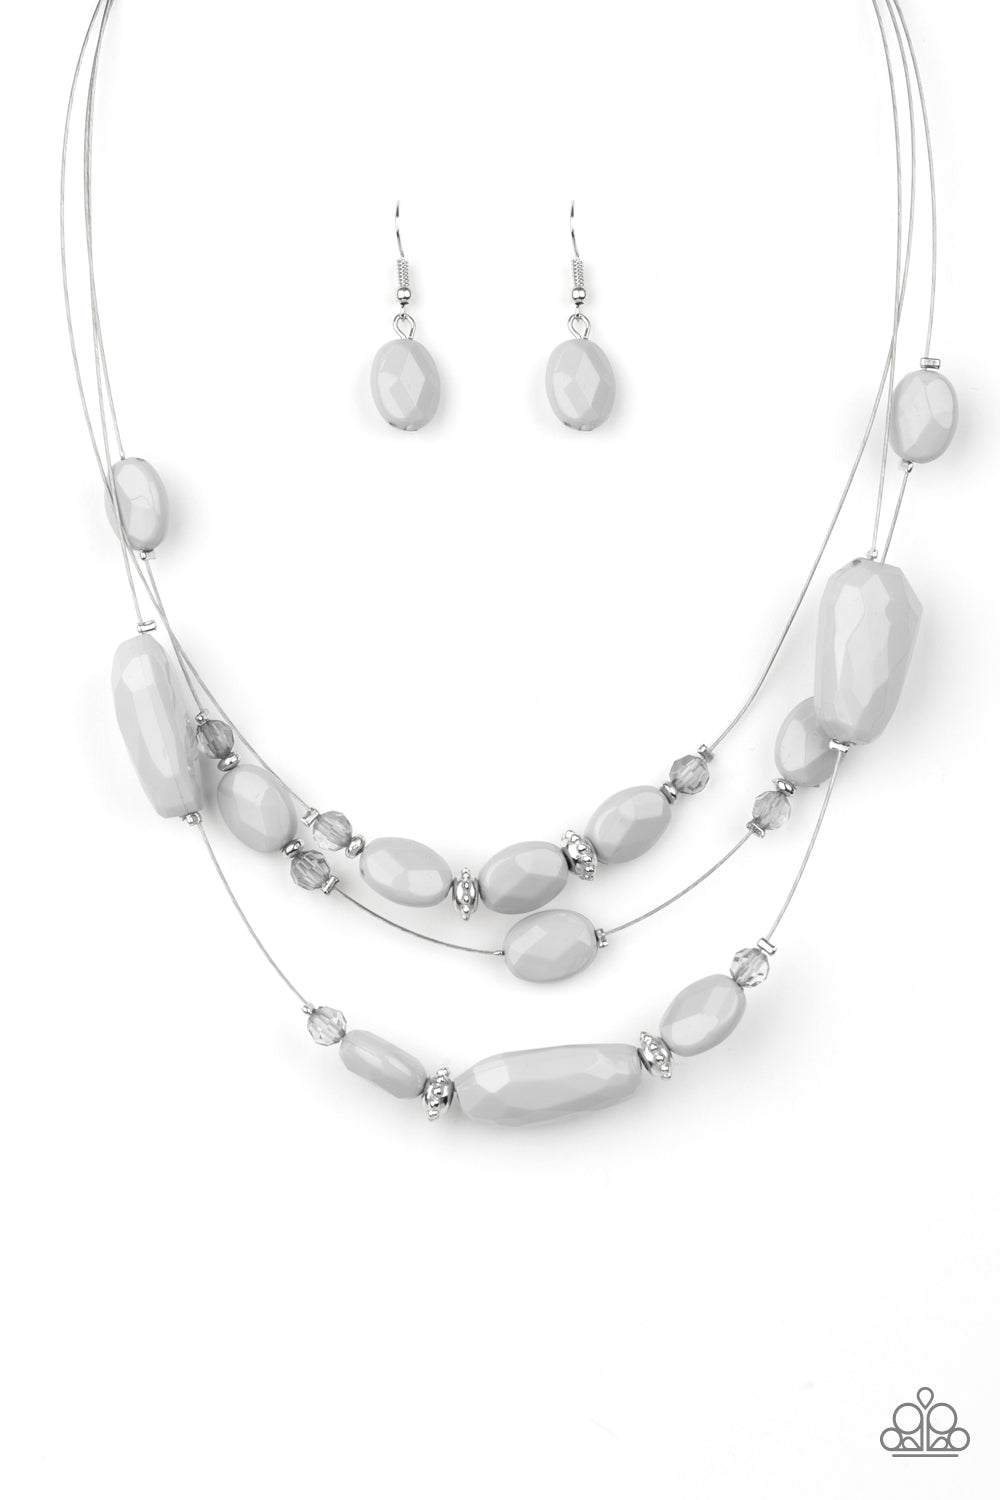 Radiant Reflections - silver - Paparazzi necklace